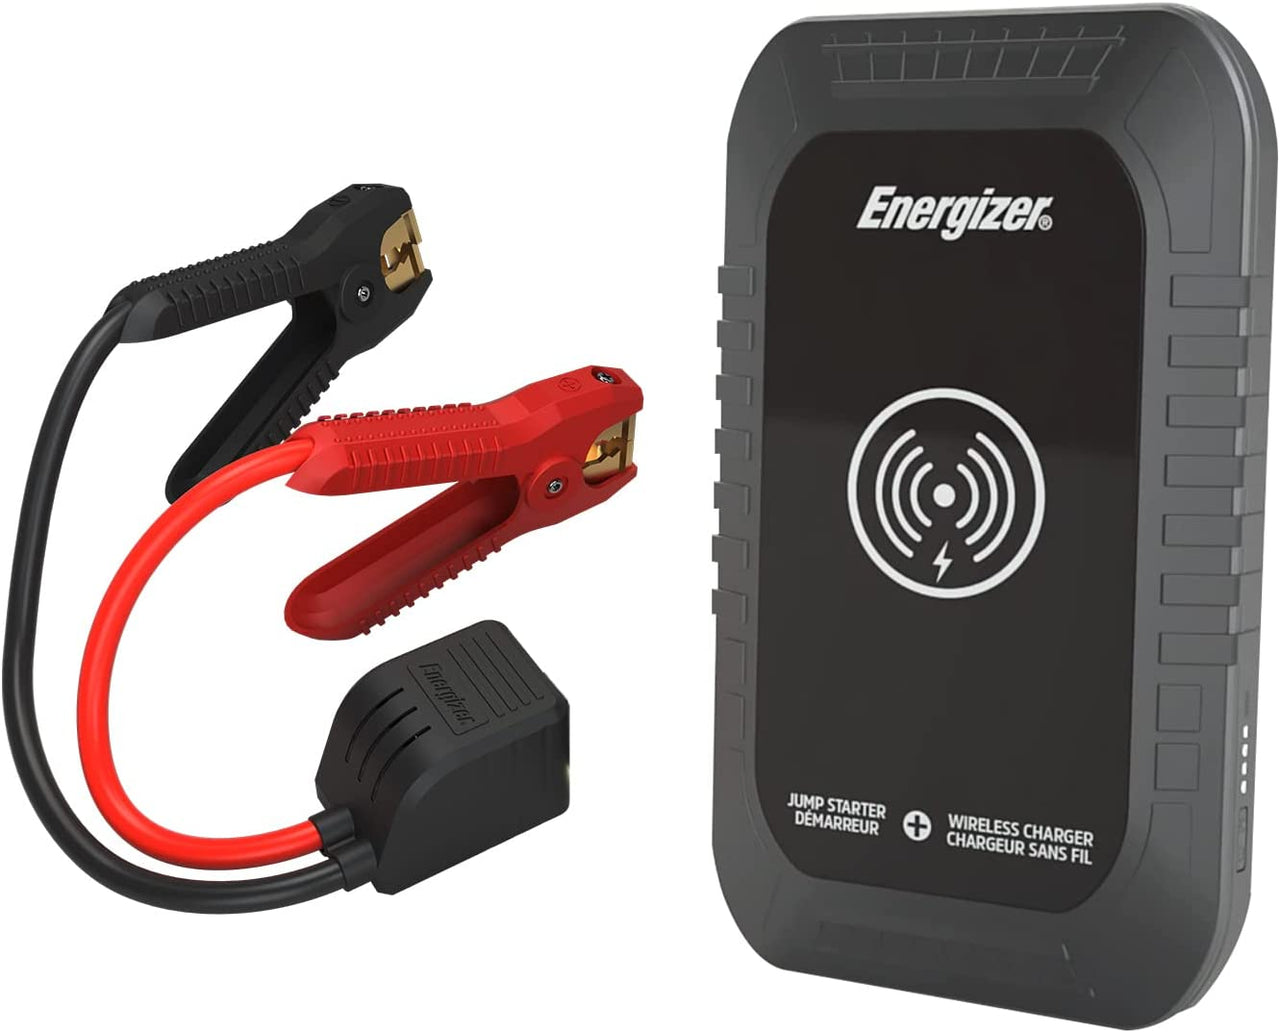 Energizer Portable Auto Battery Charger Jump Starter, 12V Lithium Jump Starter Box, Car Battery Booster Pack, Portable Power Bank Charger & Jumper Cables up to 6L Gas 3L Diesel Engine - ETL Certified